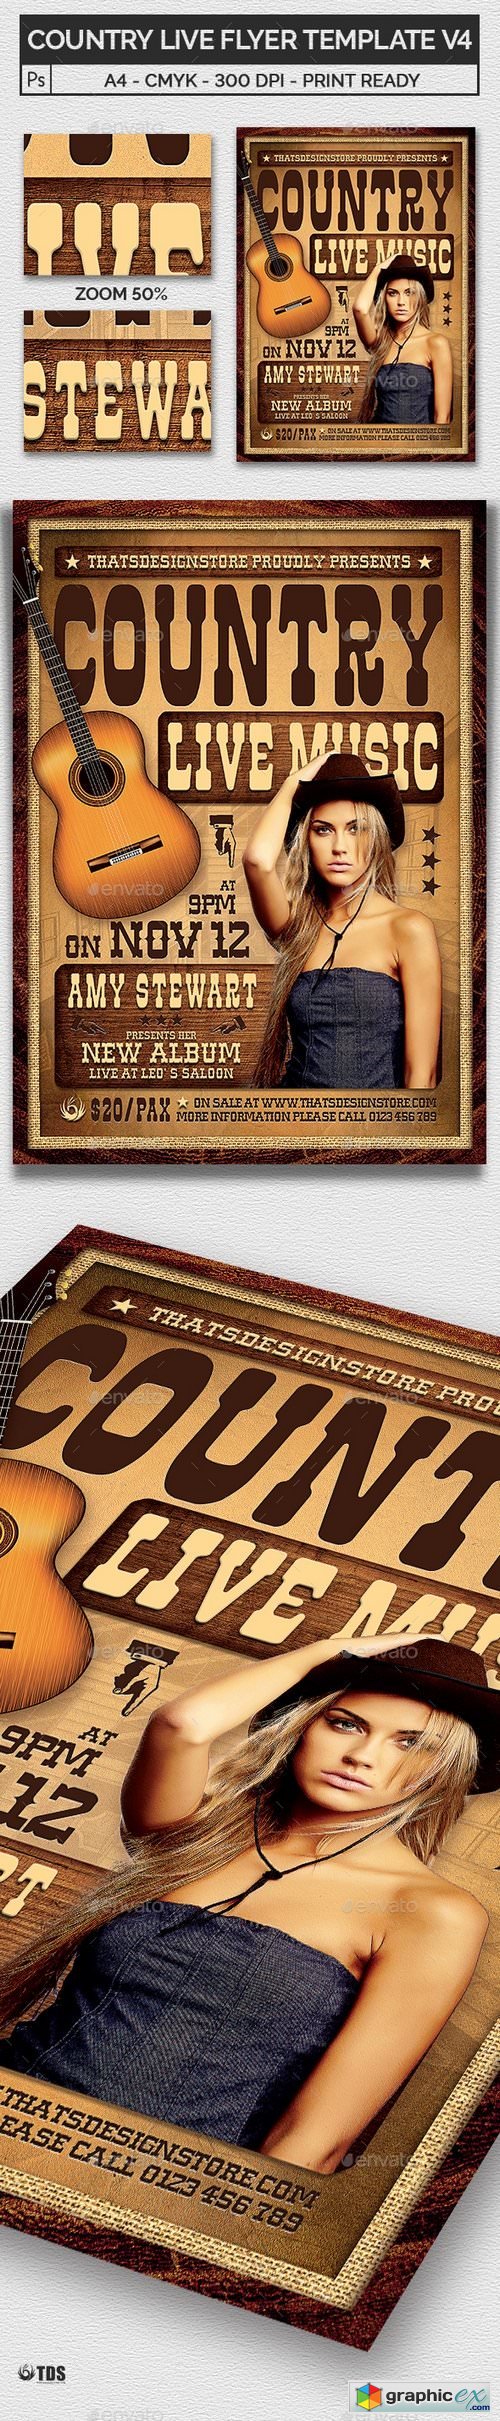 Country Live Flyer Template V4